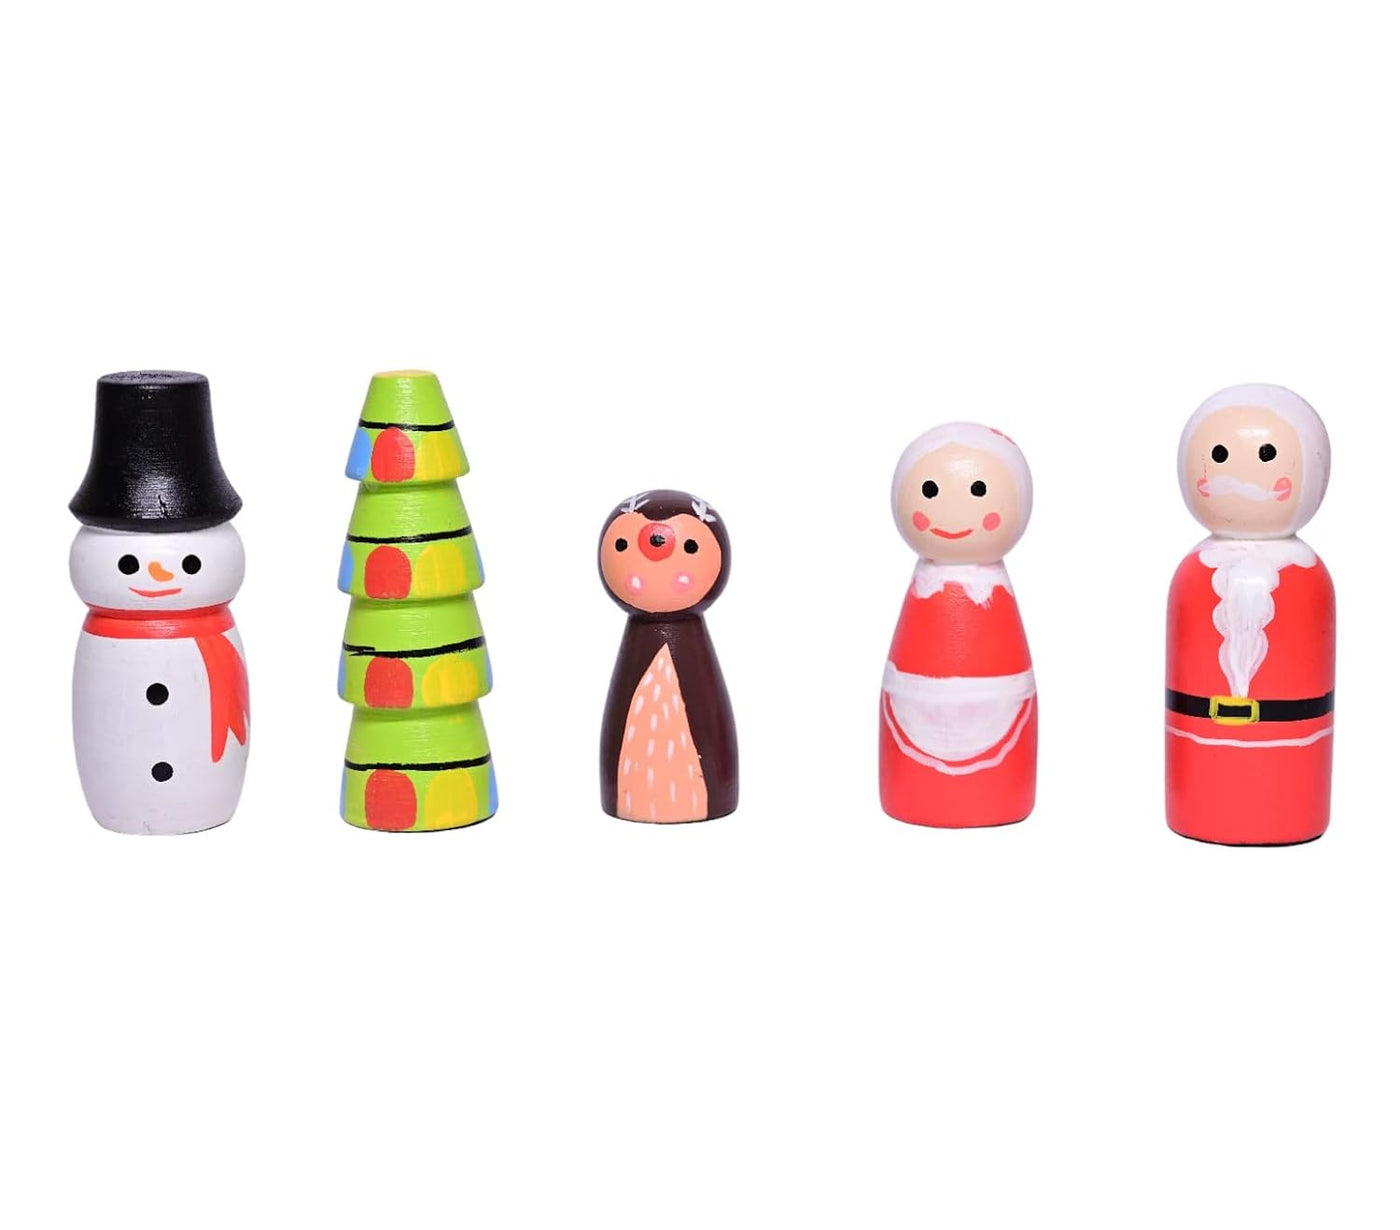 Wooden Christmas Toys Peg Dolls Family Pretend Play Figurines - Colorful Toys for Kids & Toddlers (2 Years+) - Pack of 5 pcs - Open Ended Toys